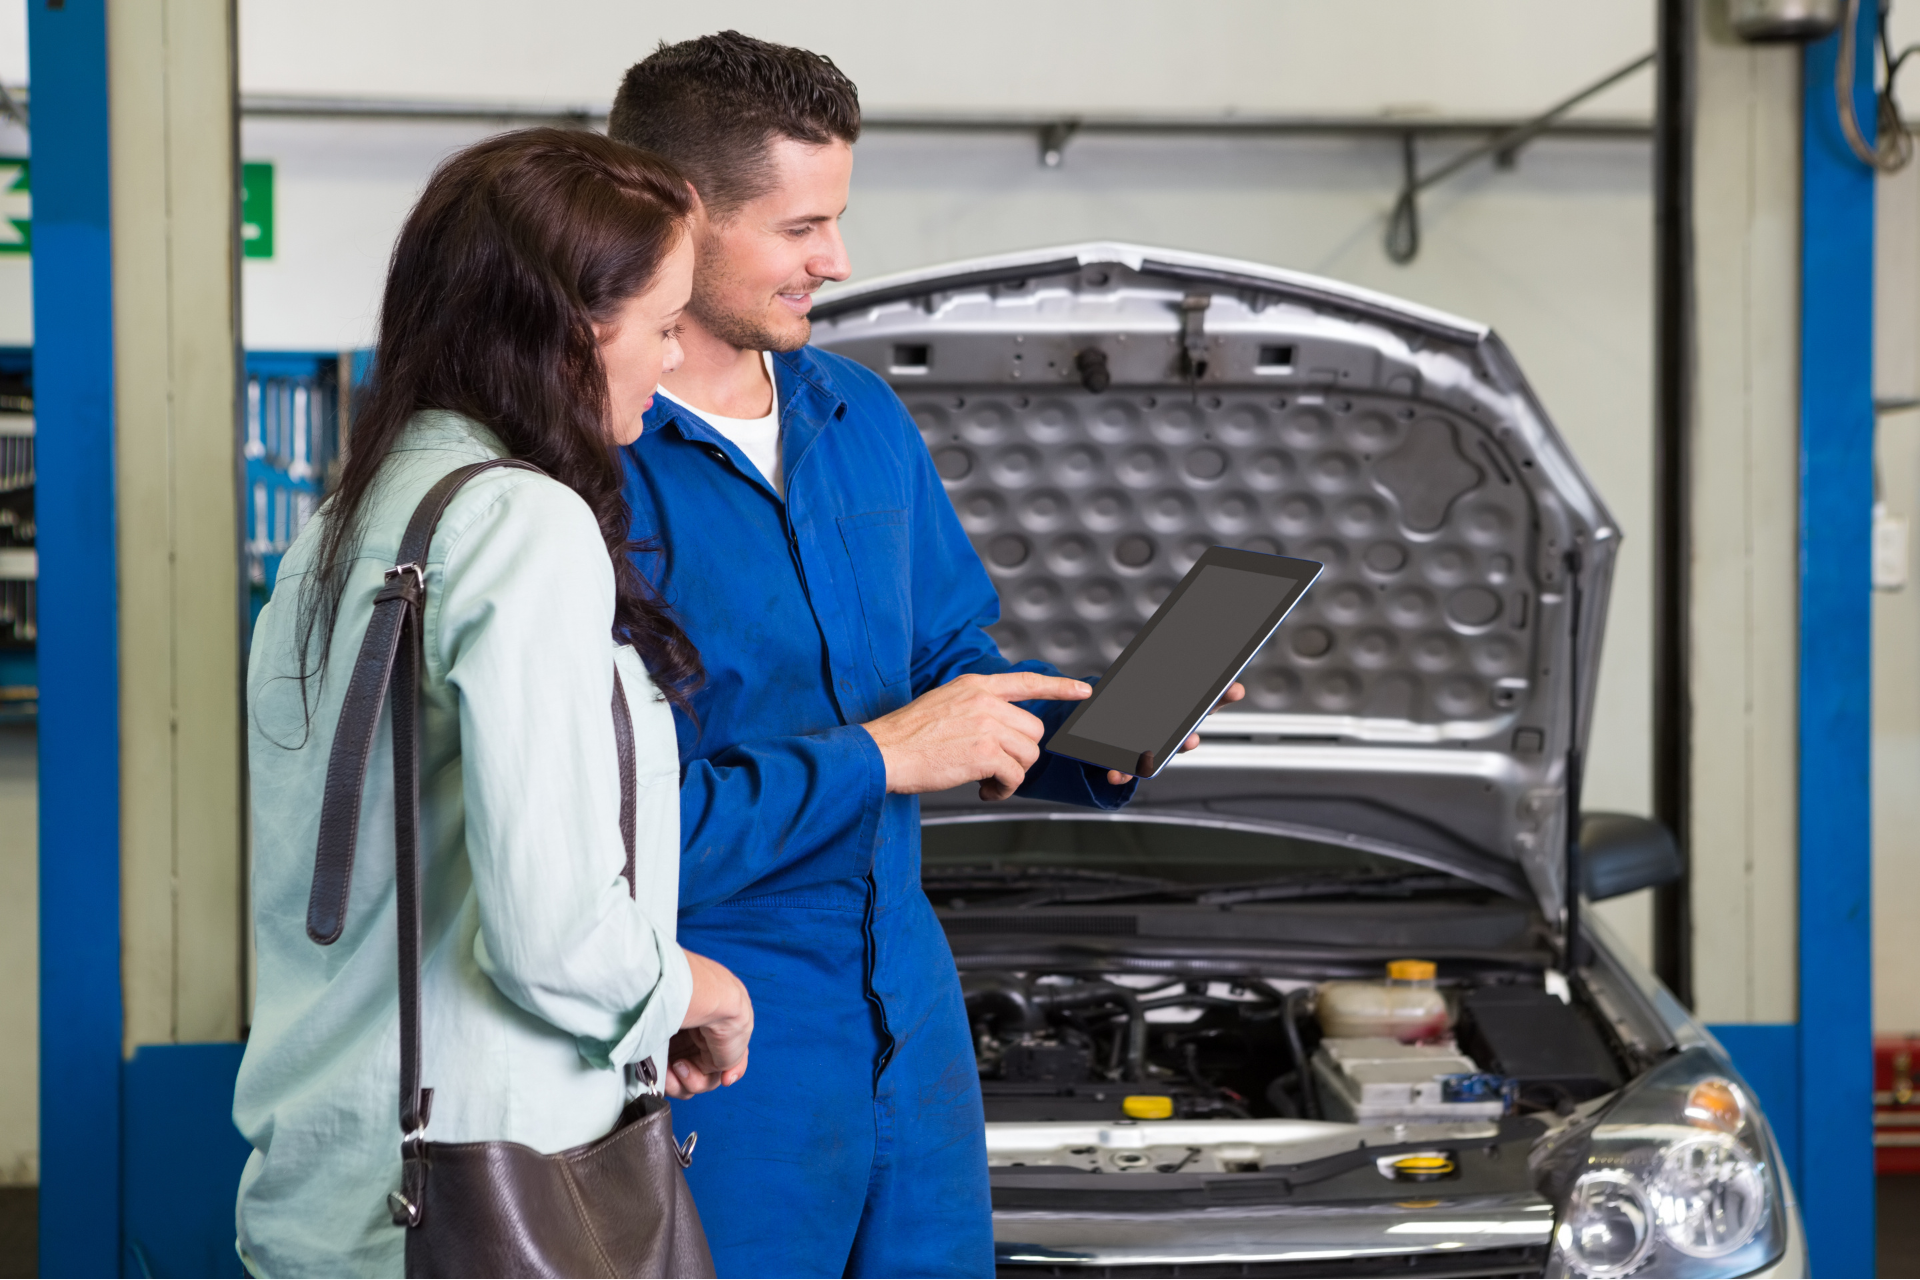 Auto Repair Nightmares: How to Avoid Common Pitfalls and Scams